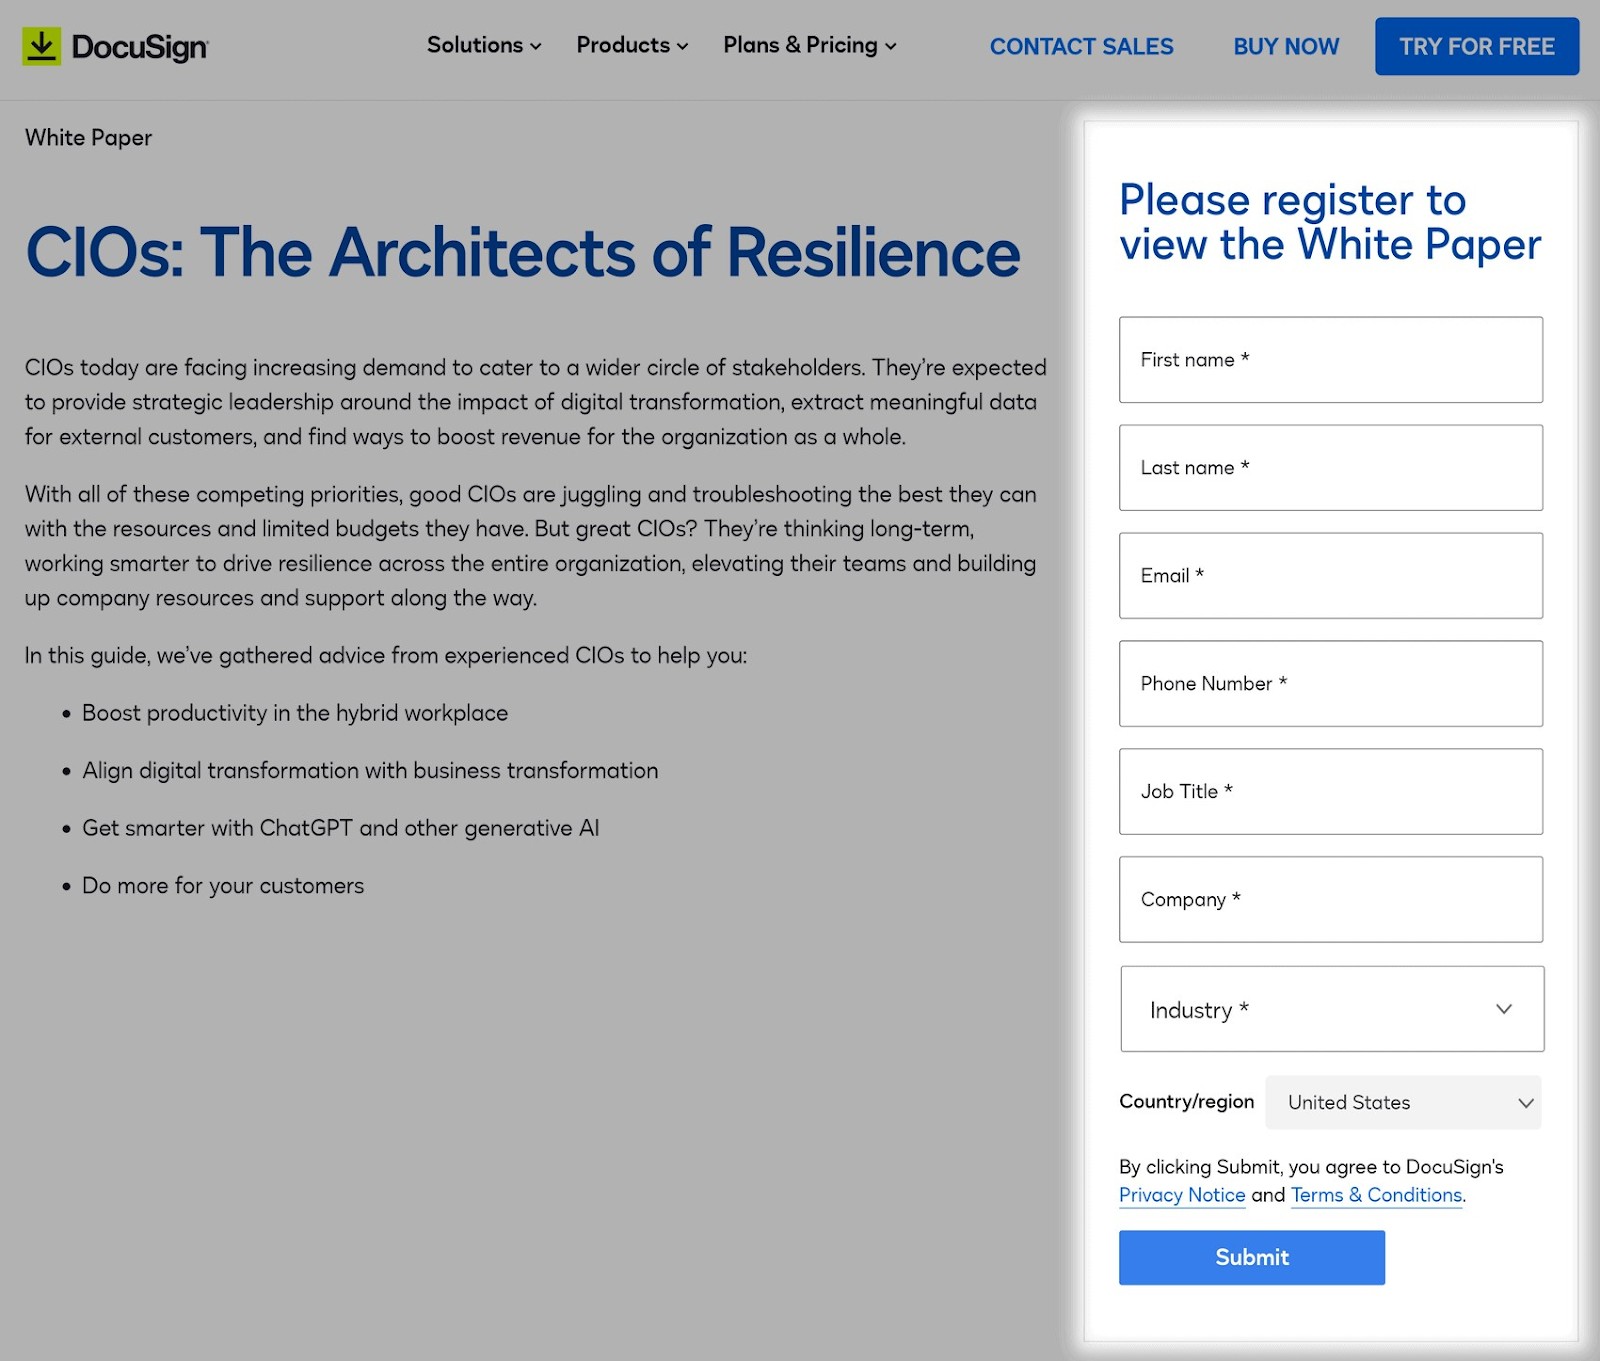 DocuSign's white paper registration page "CIOs: The Architects of Resillience"